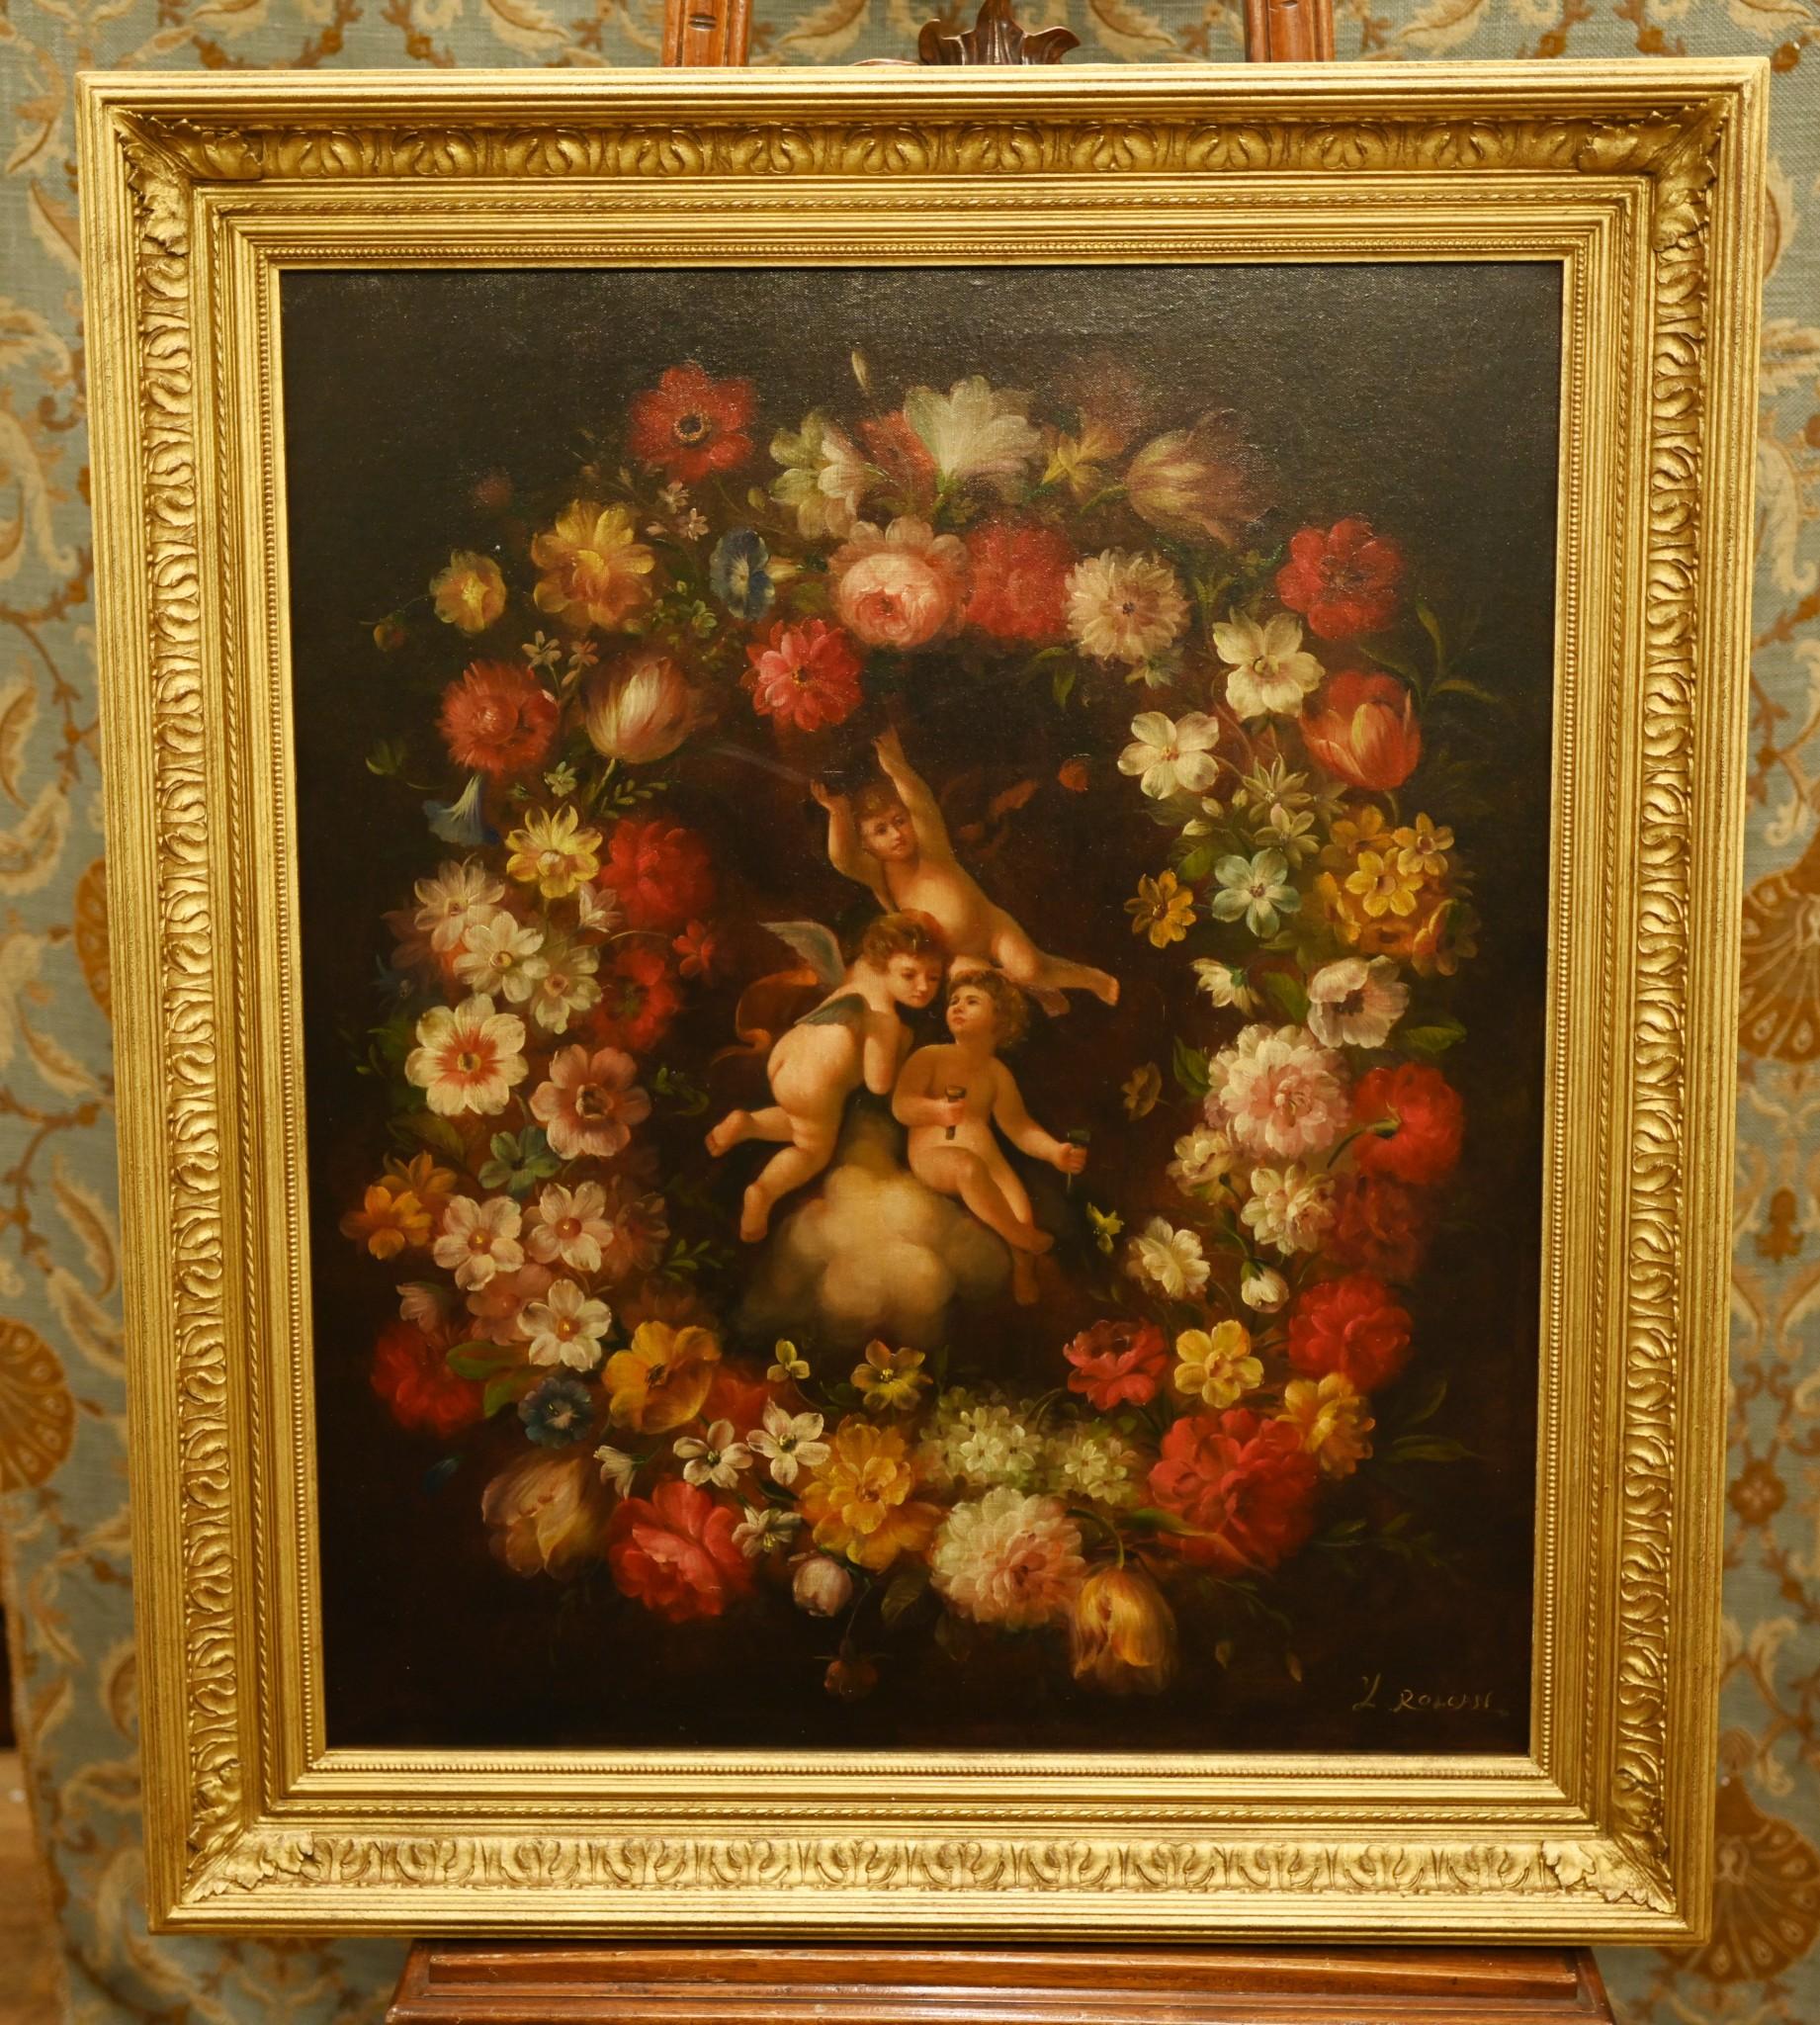 Gorgeous Regency style oil painting of a trio of cute cherubs
The cherubs are surrounded by the vivid and bright floral garland
Such a beautiful work of art this will add light and energy to any room
Piece is signed L Rolan in the bottom right